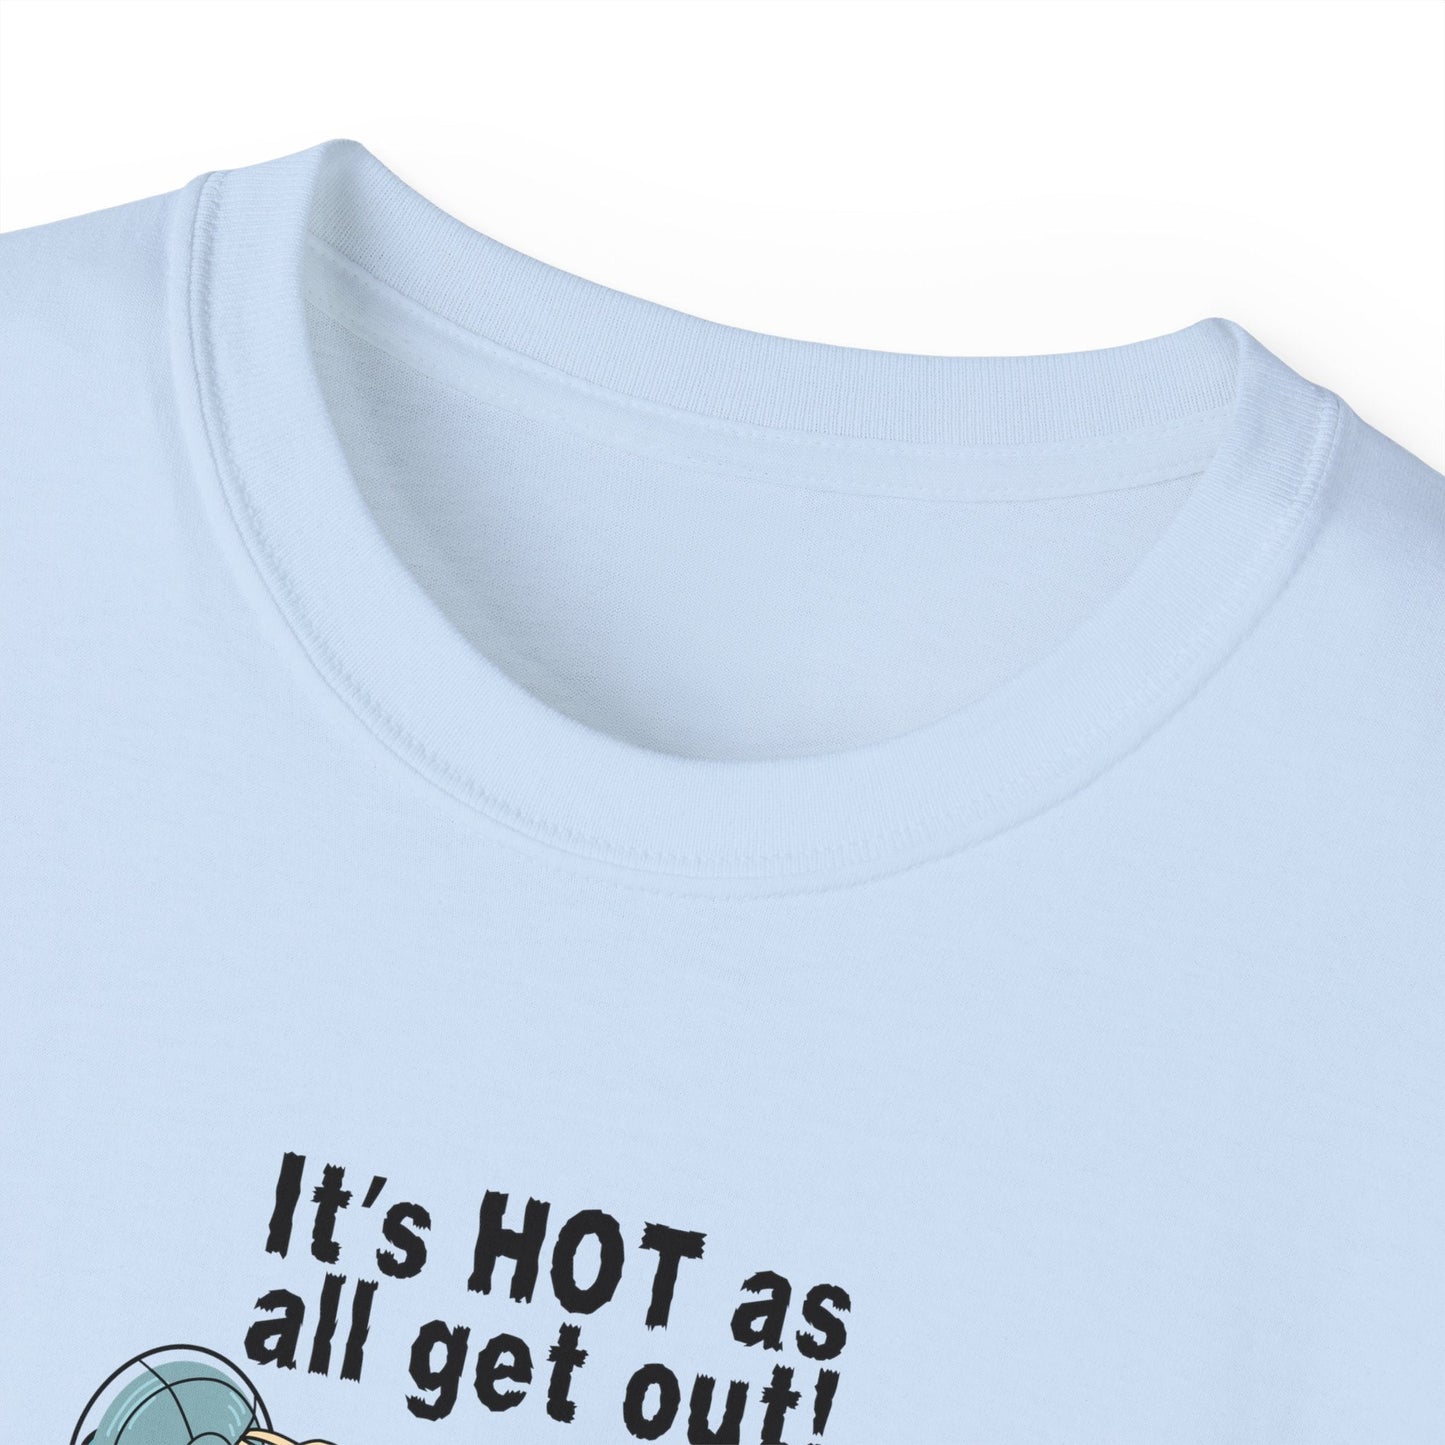 Hot as All Get Out Unisex Ultra Cotton Tee - T - Shirt - Epileptic Al’s Shop